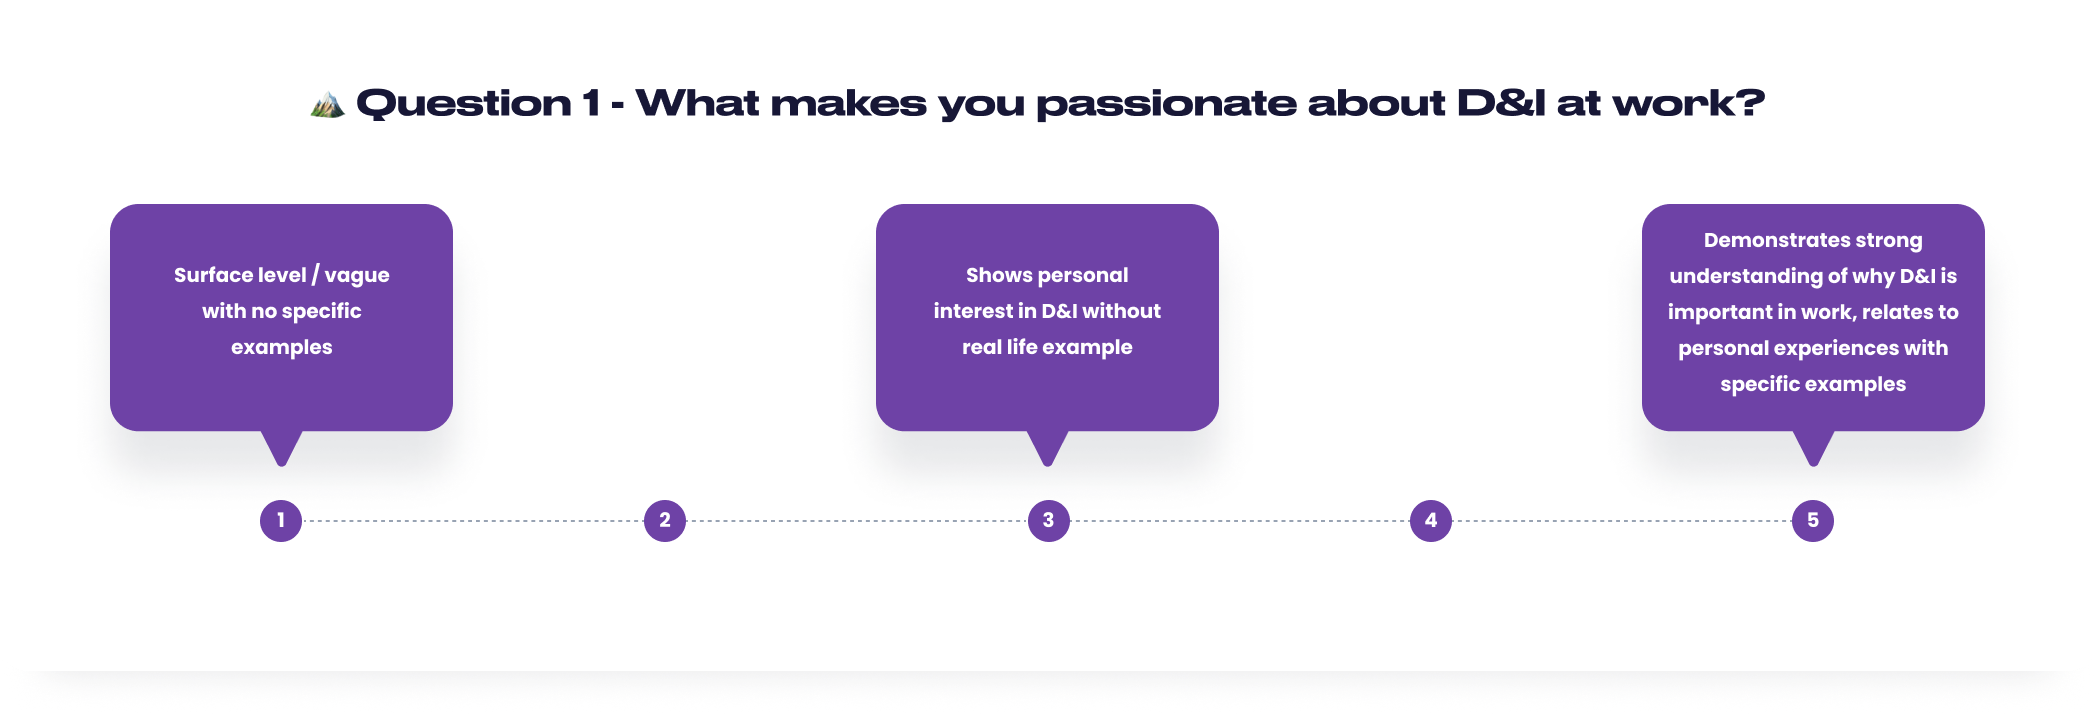 Work sample rating scale for question 1: what makes you passionate about D&I?